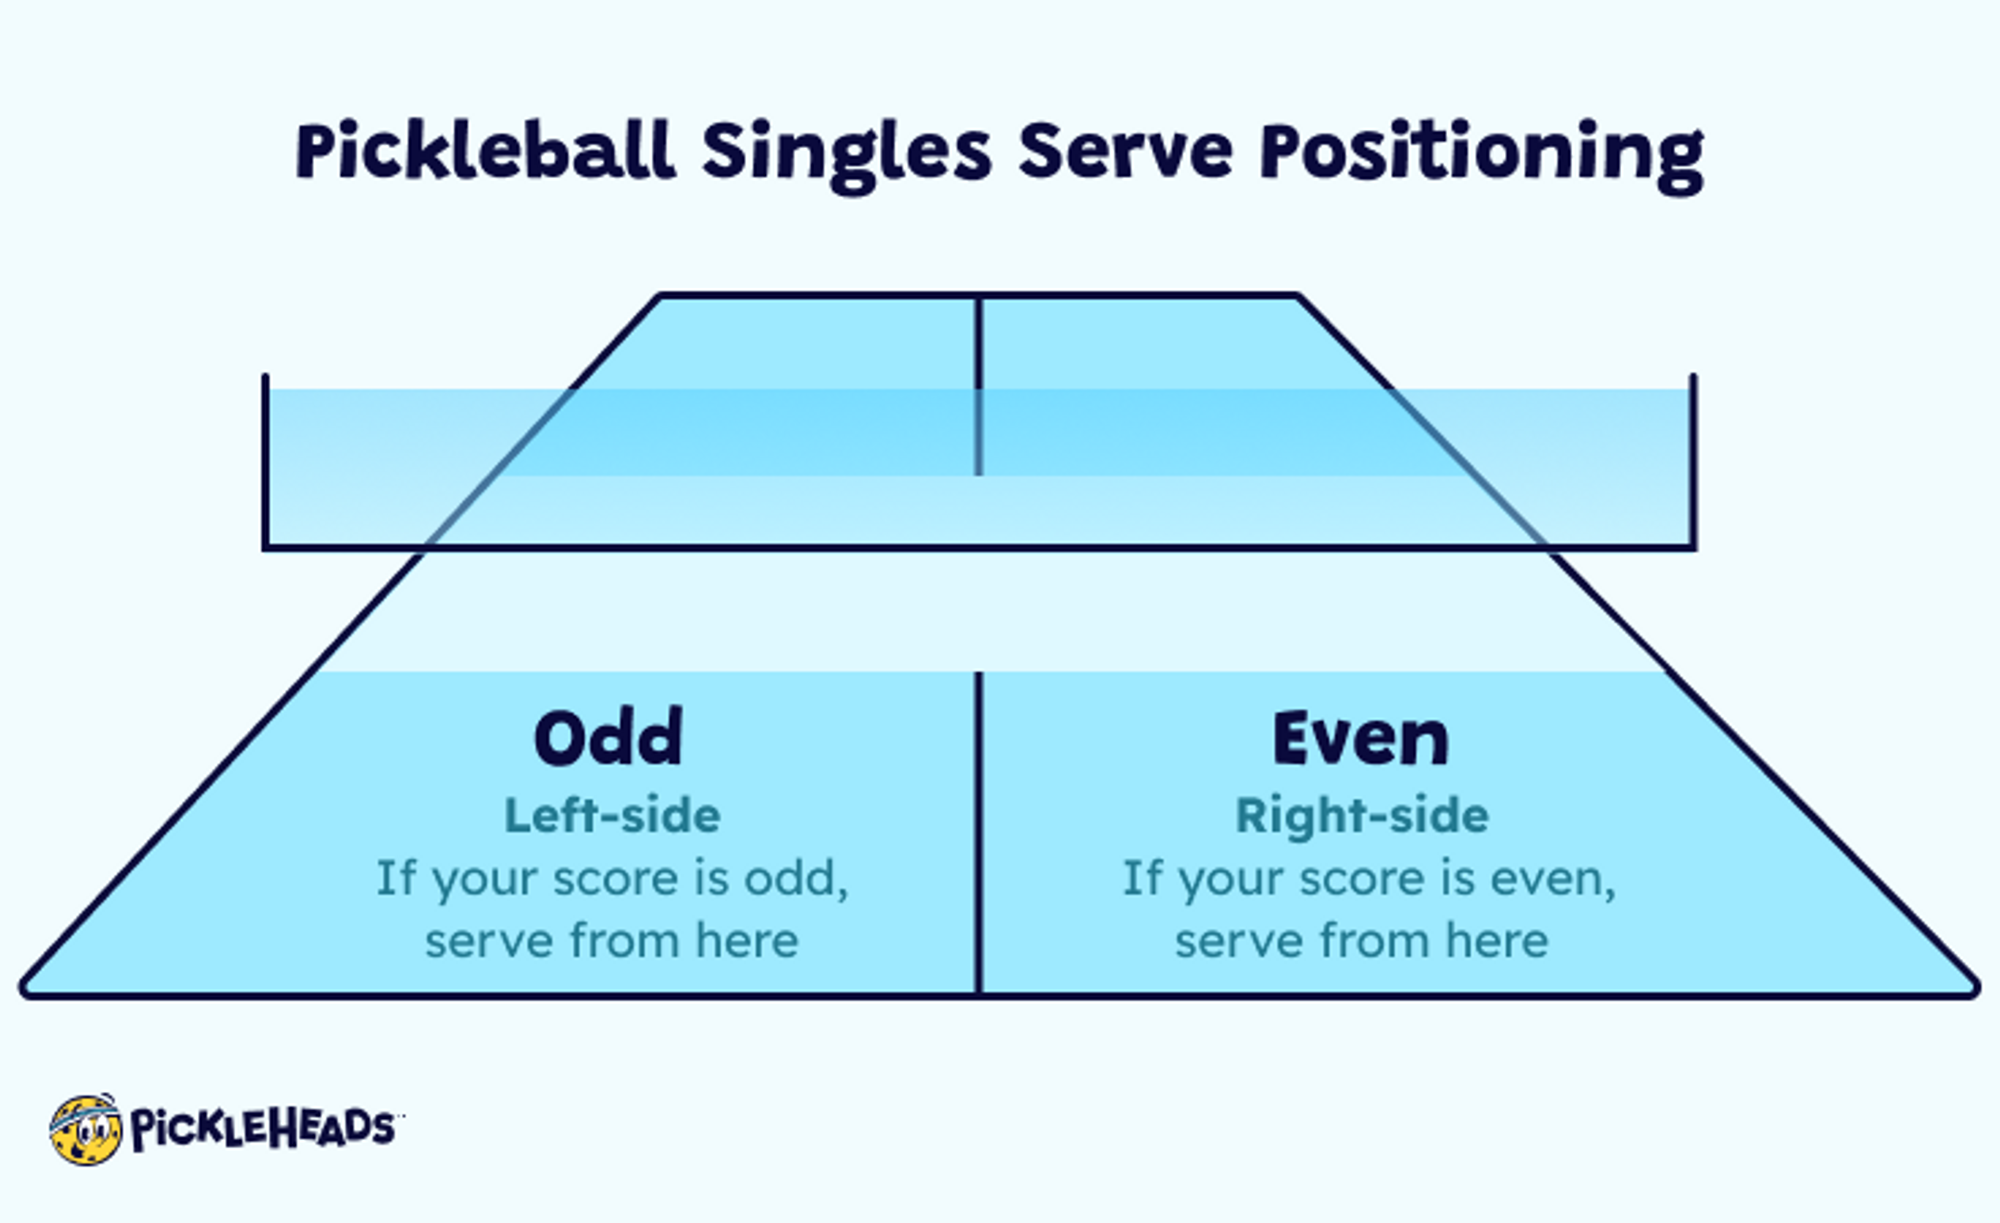 Graphic showing the pickleball singles serving positions